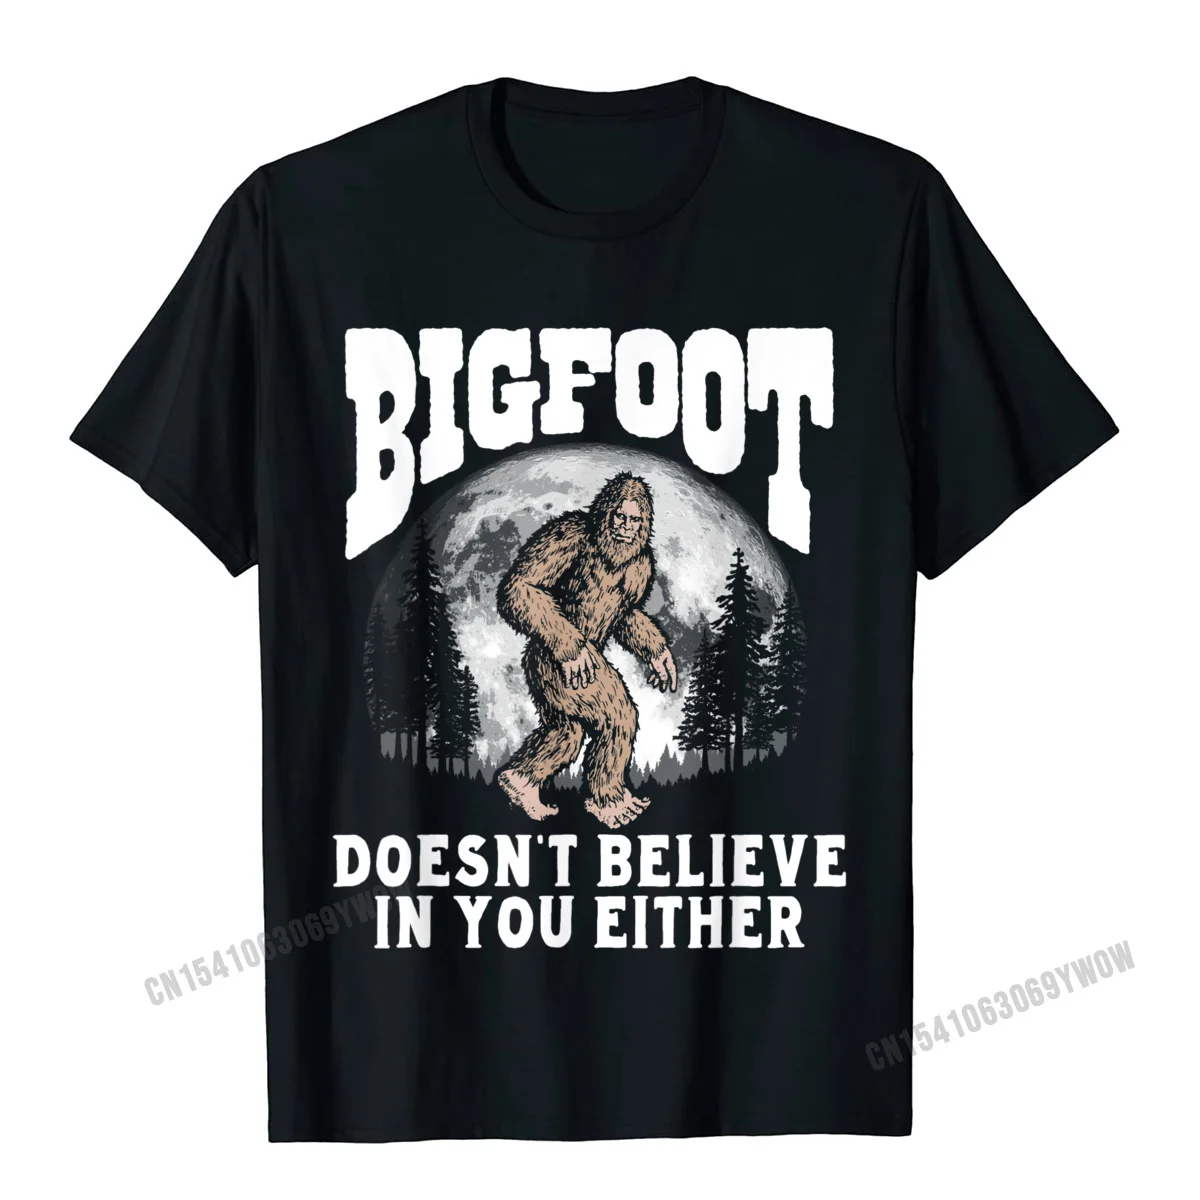 Bigfoot Doesnt Believe In You Either Funny Sasquatch Moon T-Shirt Camisas Men Summer T Shirt For Men Cotton Tshirts Customized